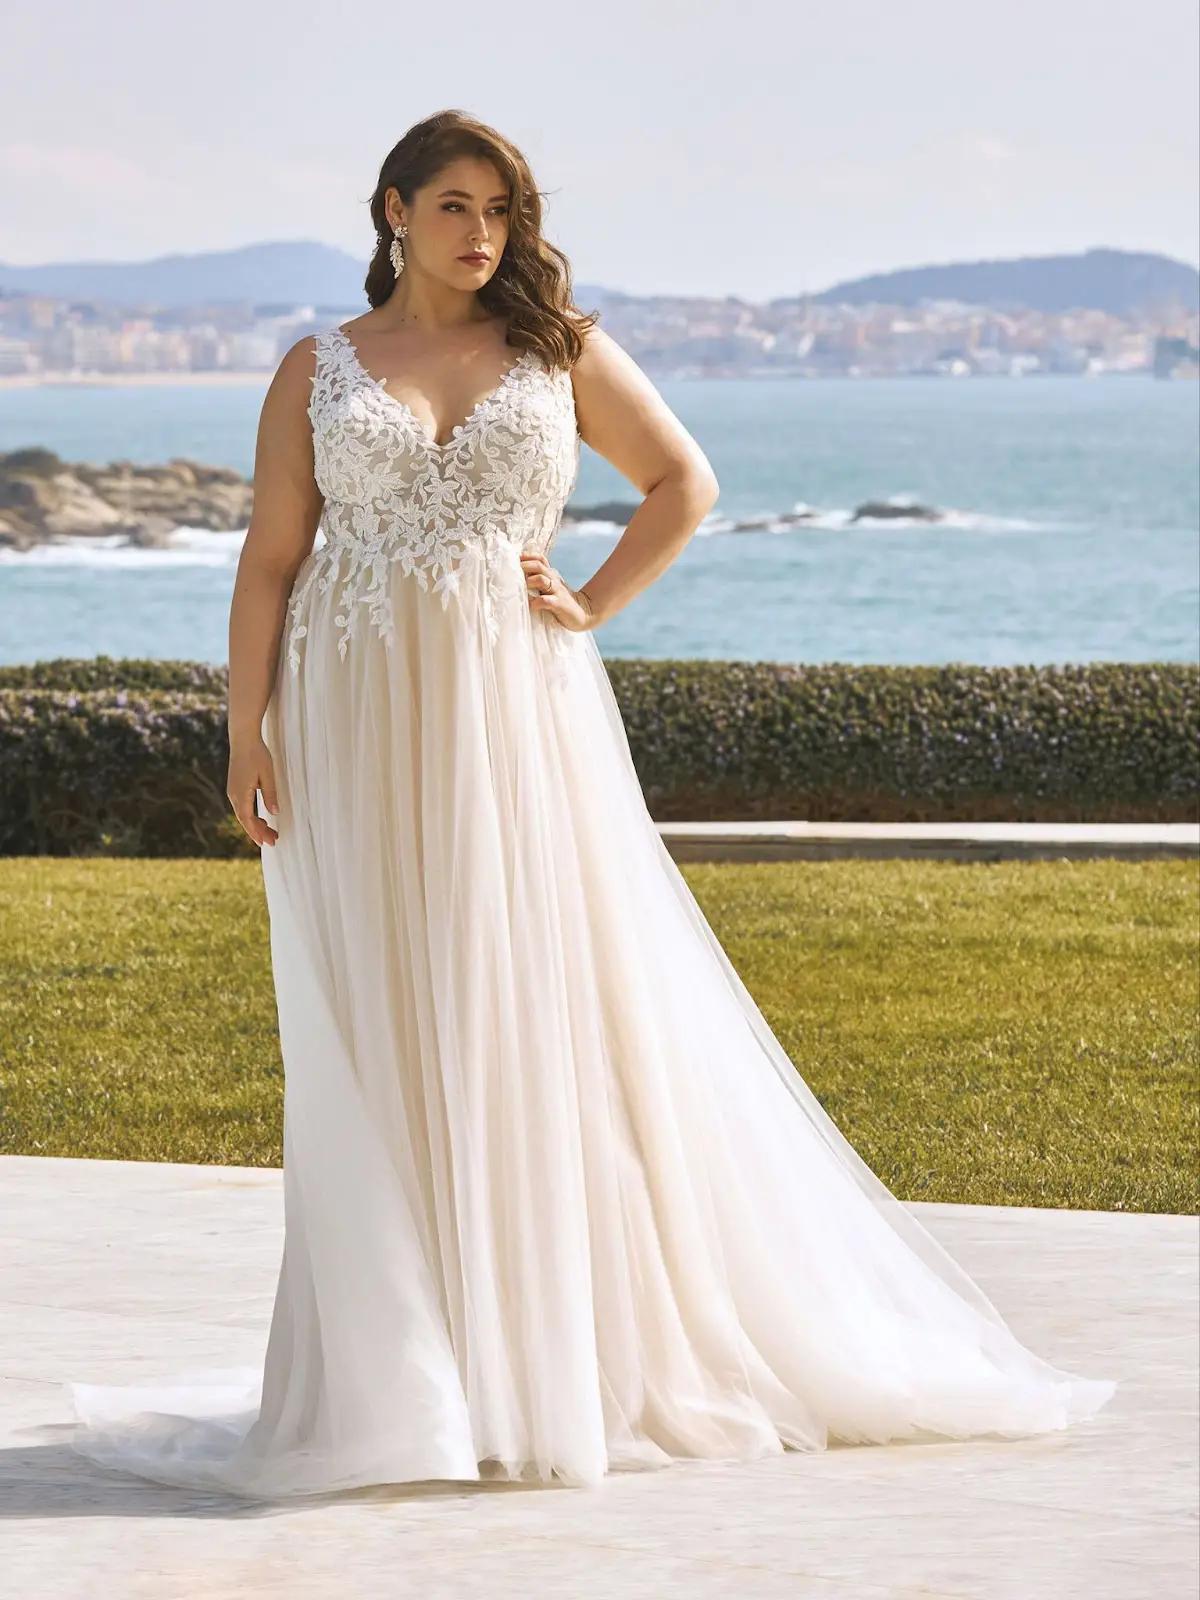 Perfect Gowns for Summer Weddings Image